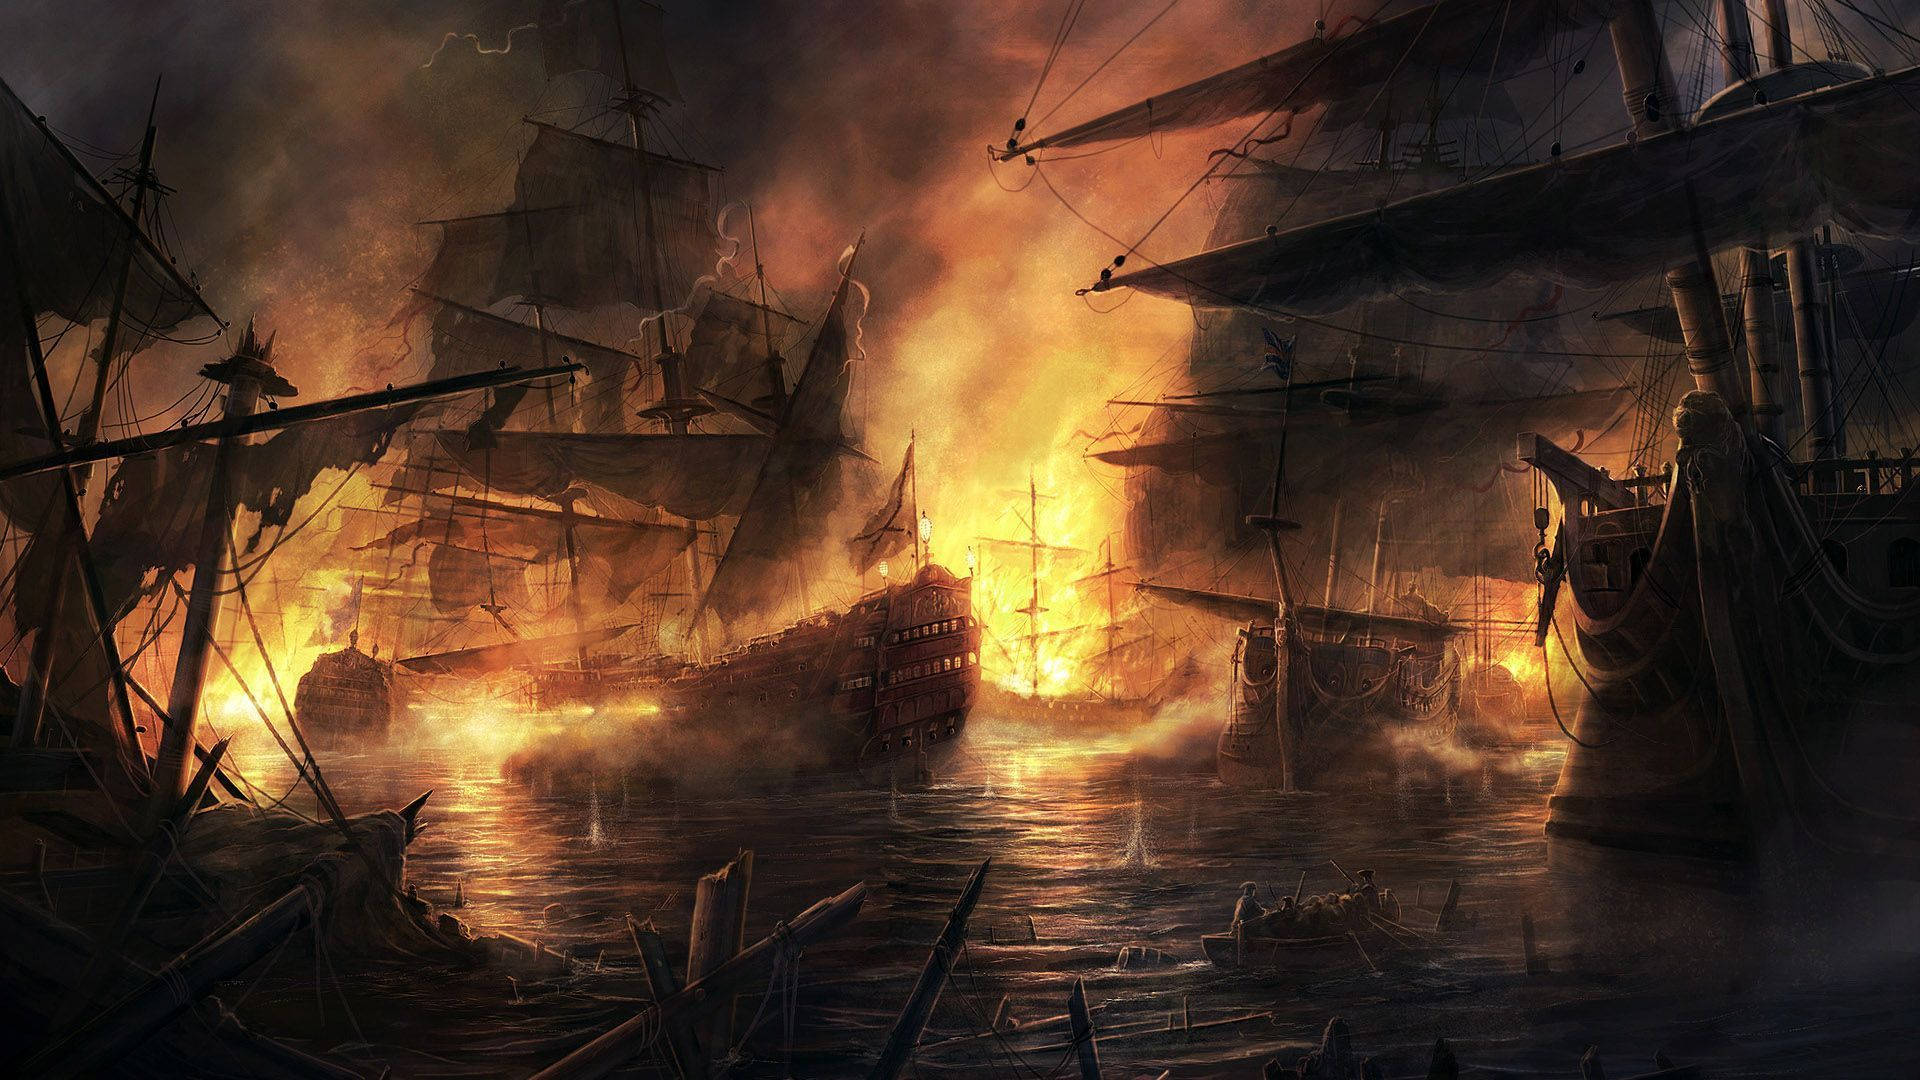 Pirate Ships On Fire